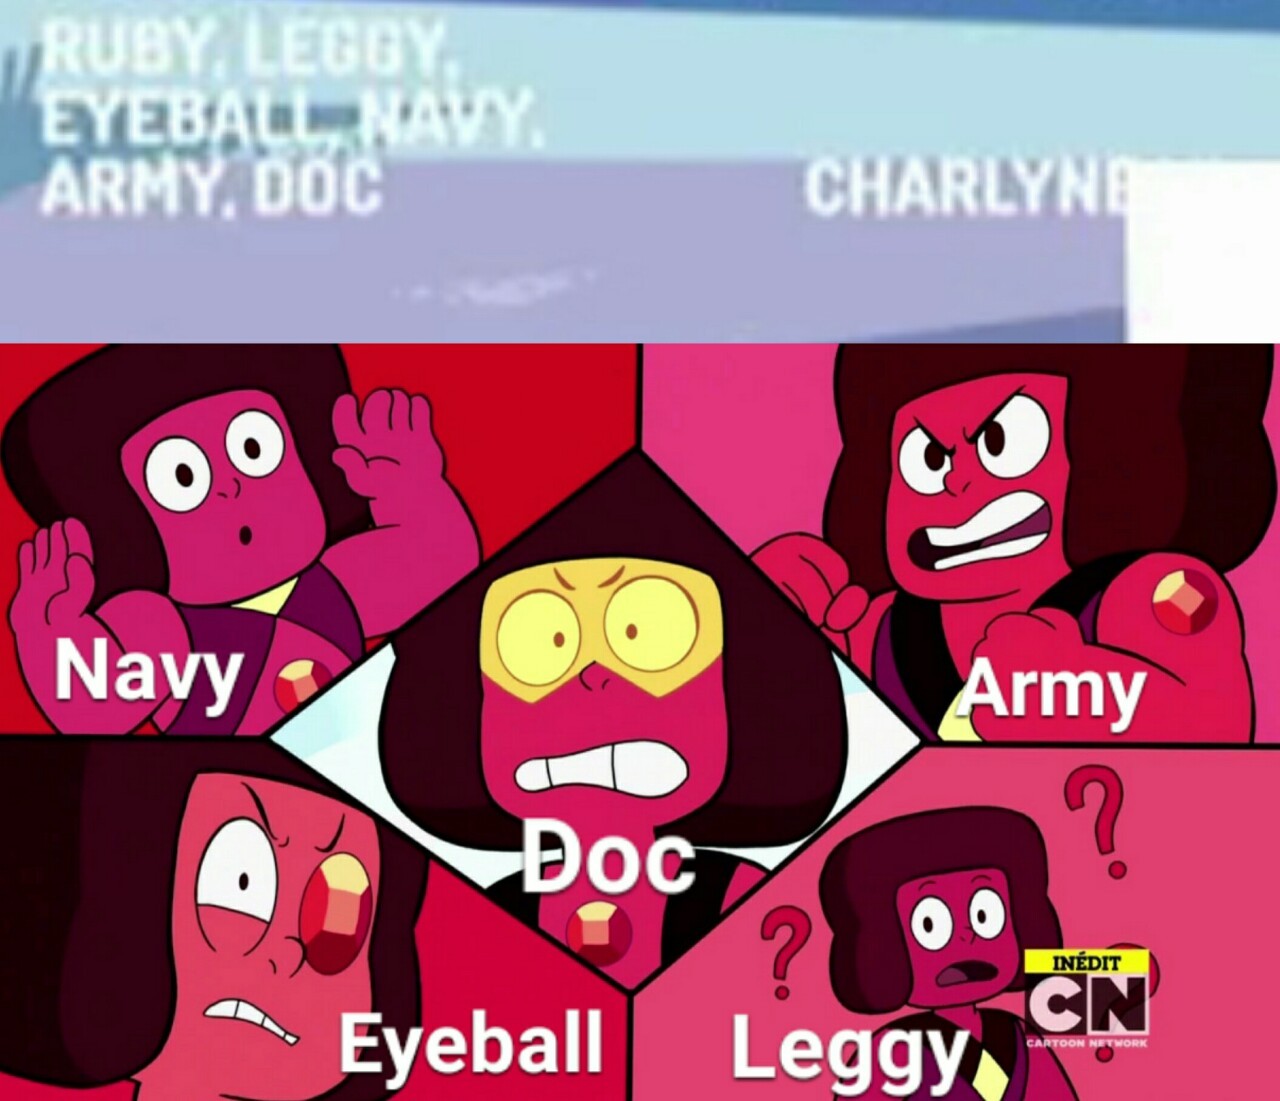 c-2eta:  Apparently the crewniverse gave nicknames to all of the Ruby squad:  Doc,